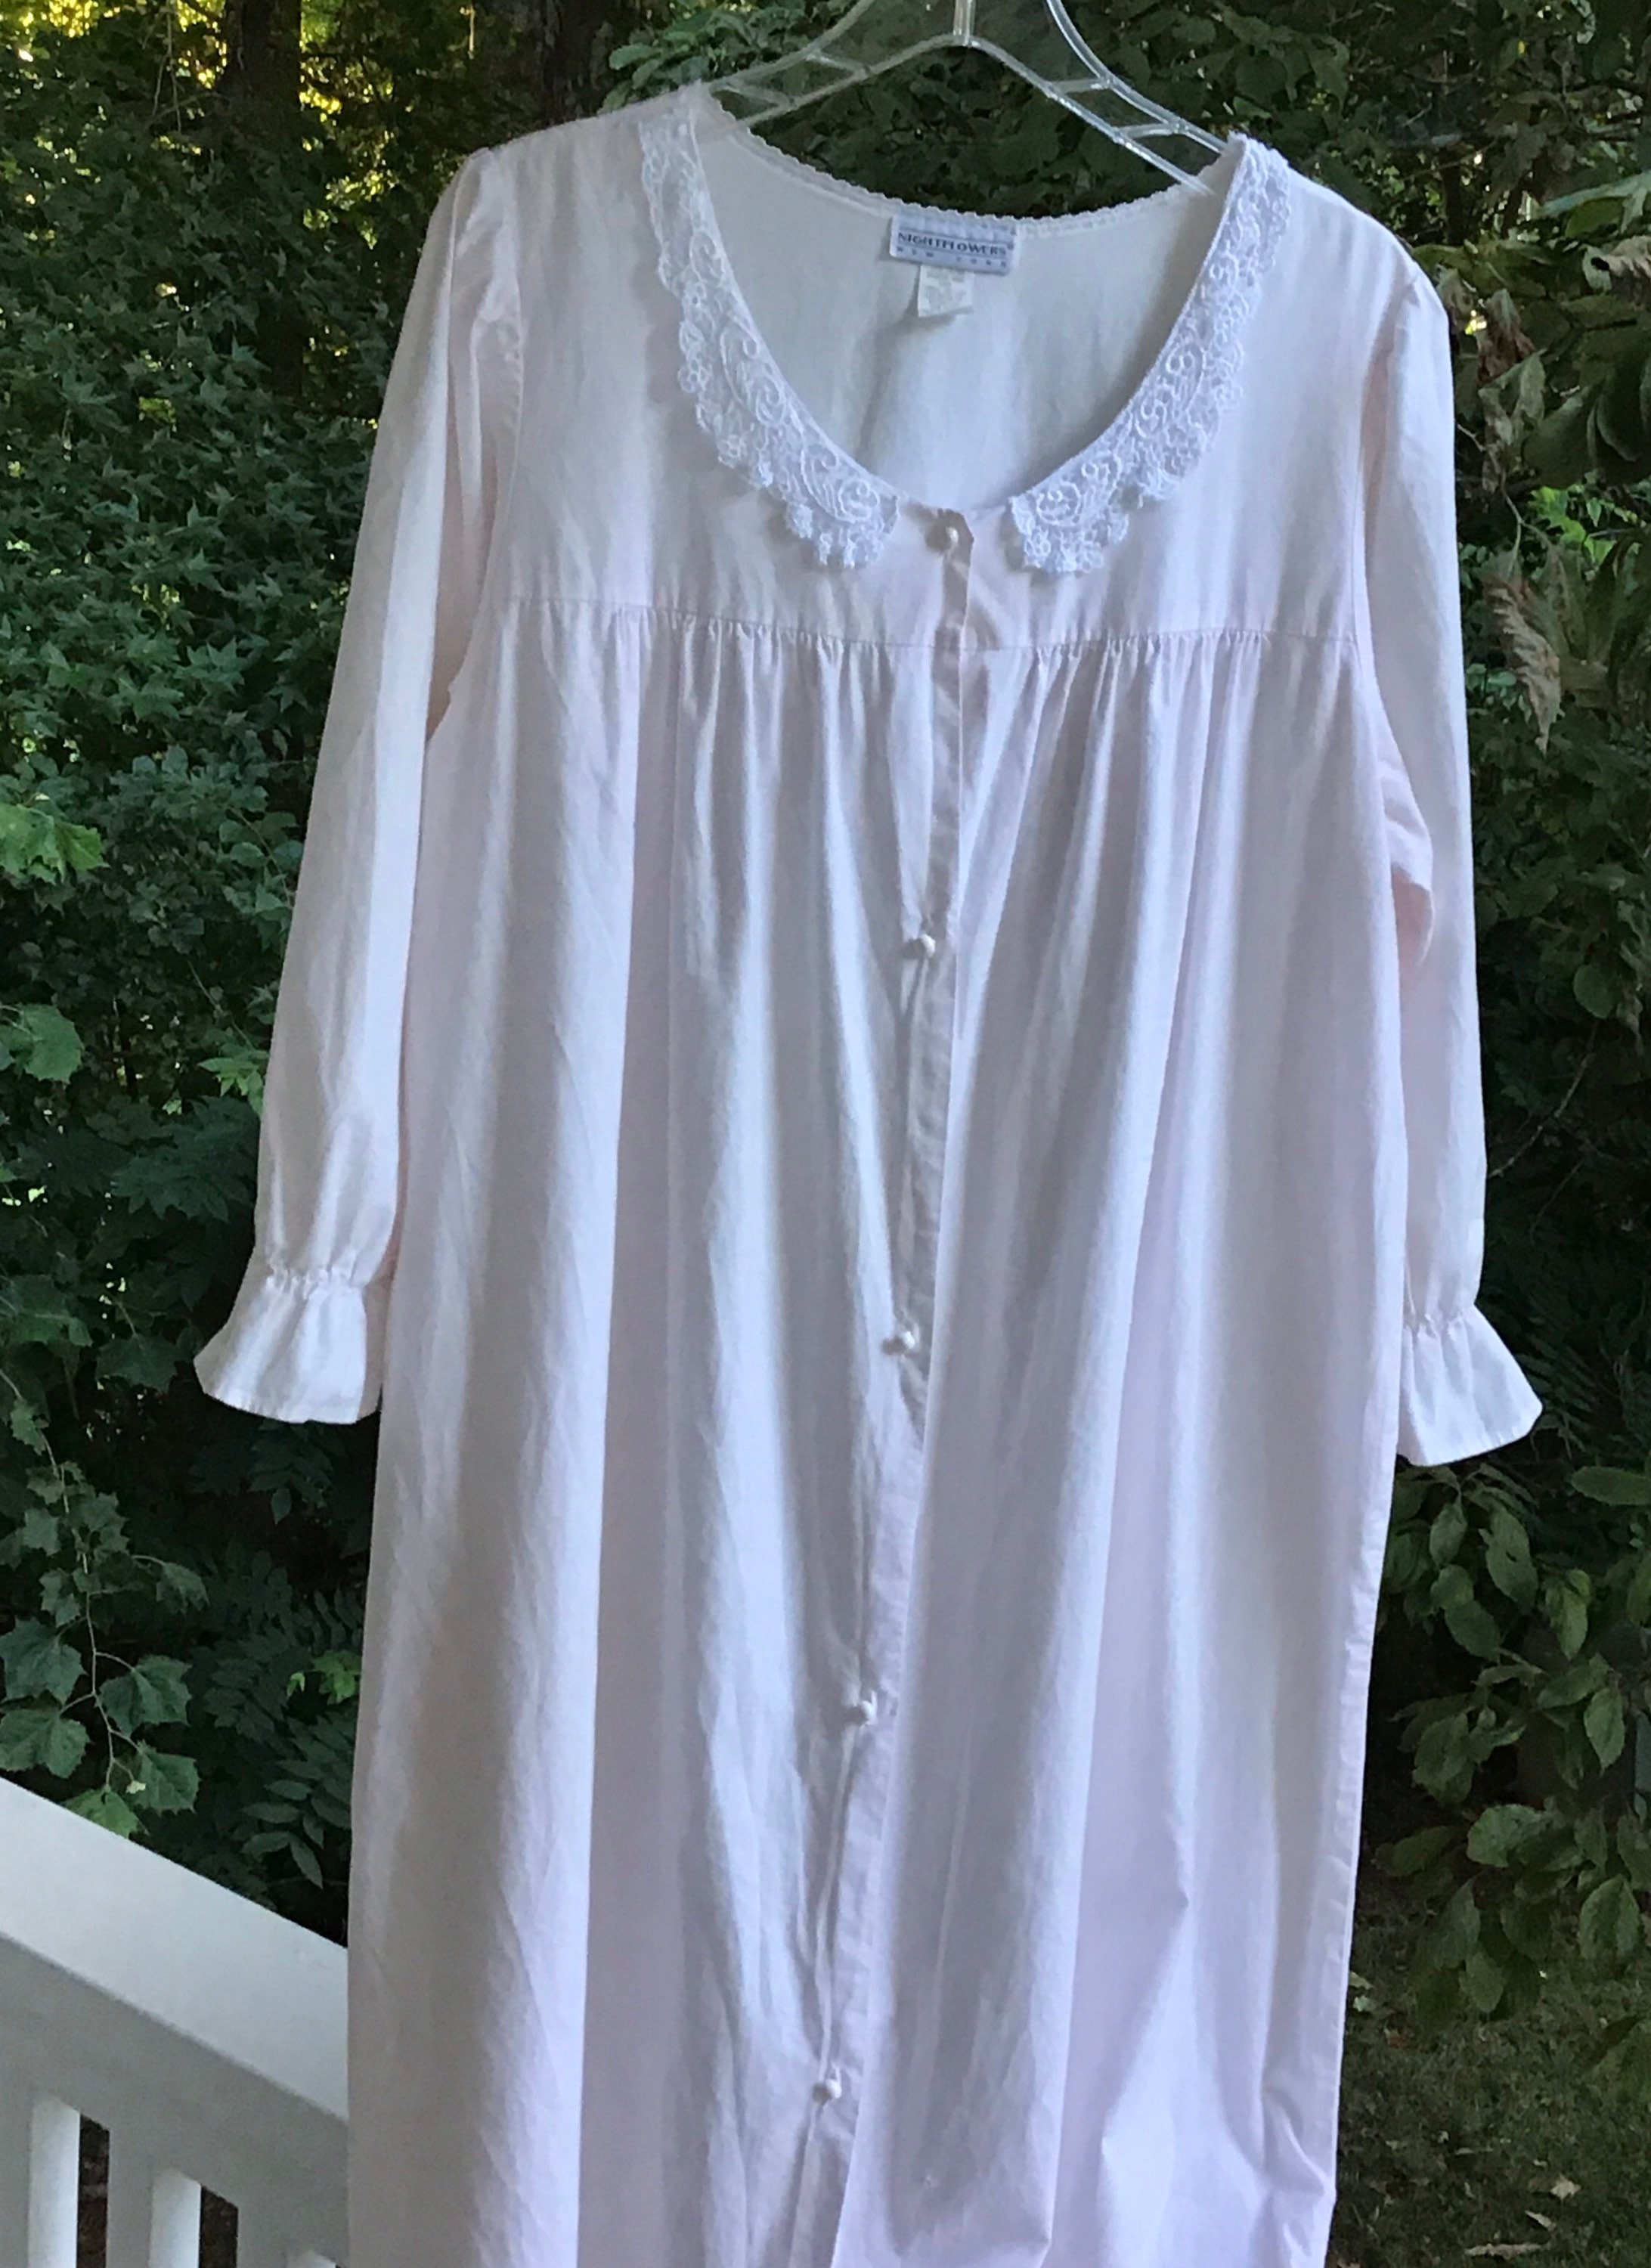 90s Victorian style nightgown size large | Etsy